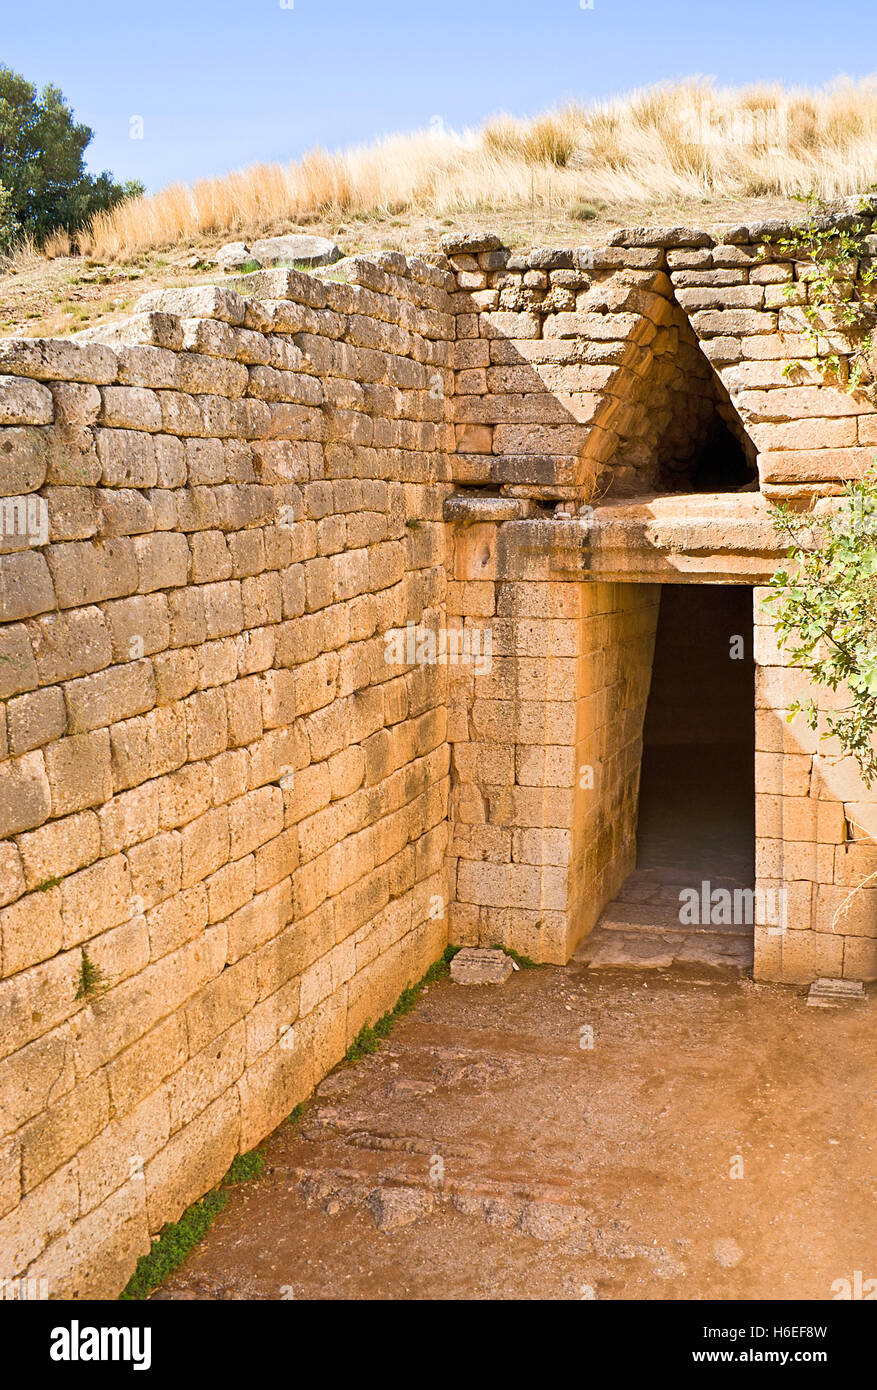 A beehive tomb, also known as a tholos tomb located in the ancient Mycenae, Greece. Stock Photo